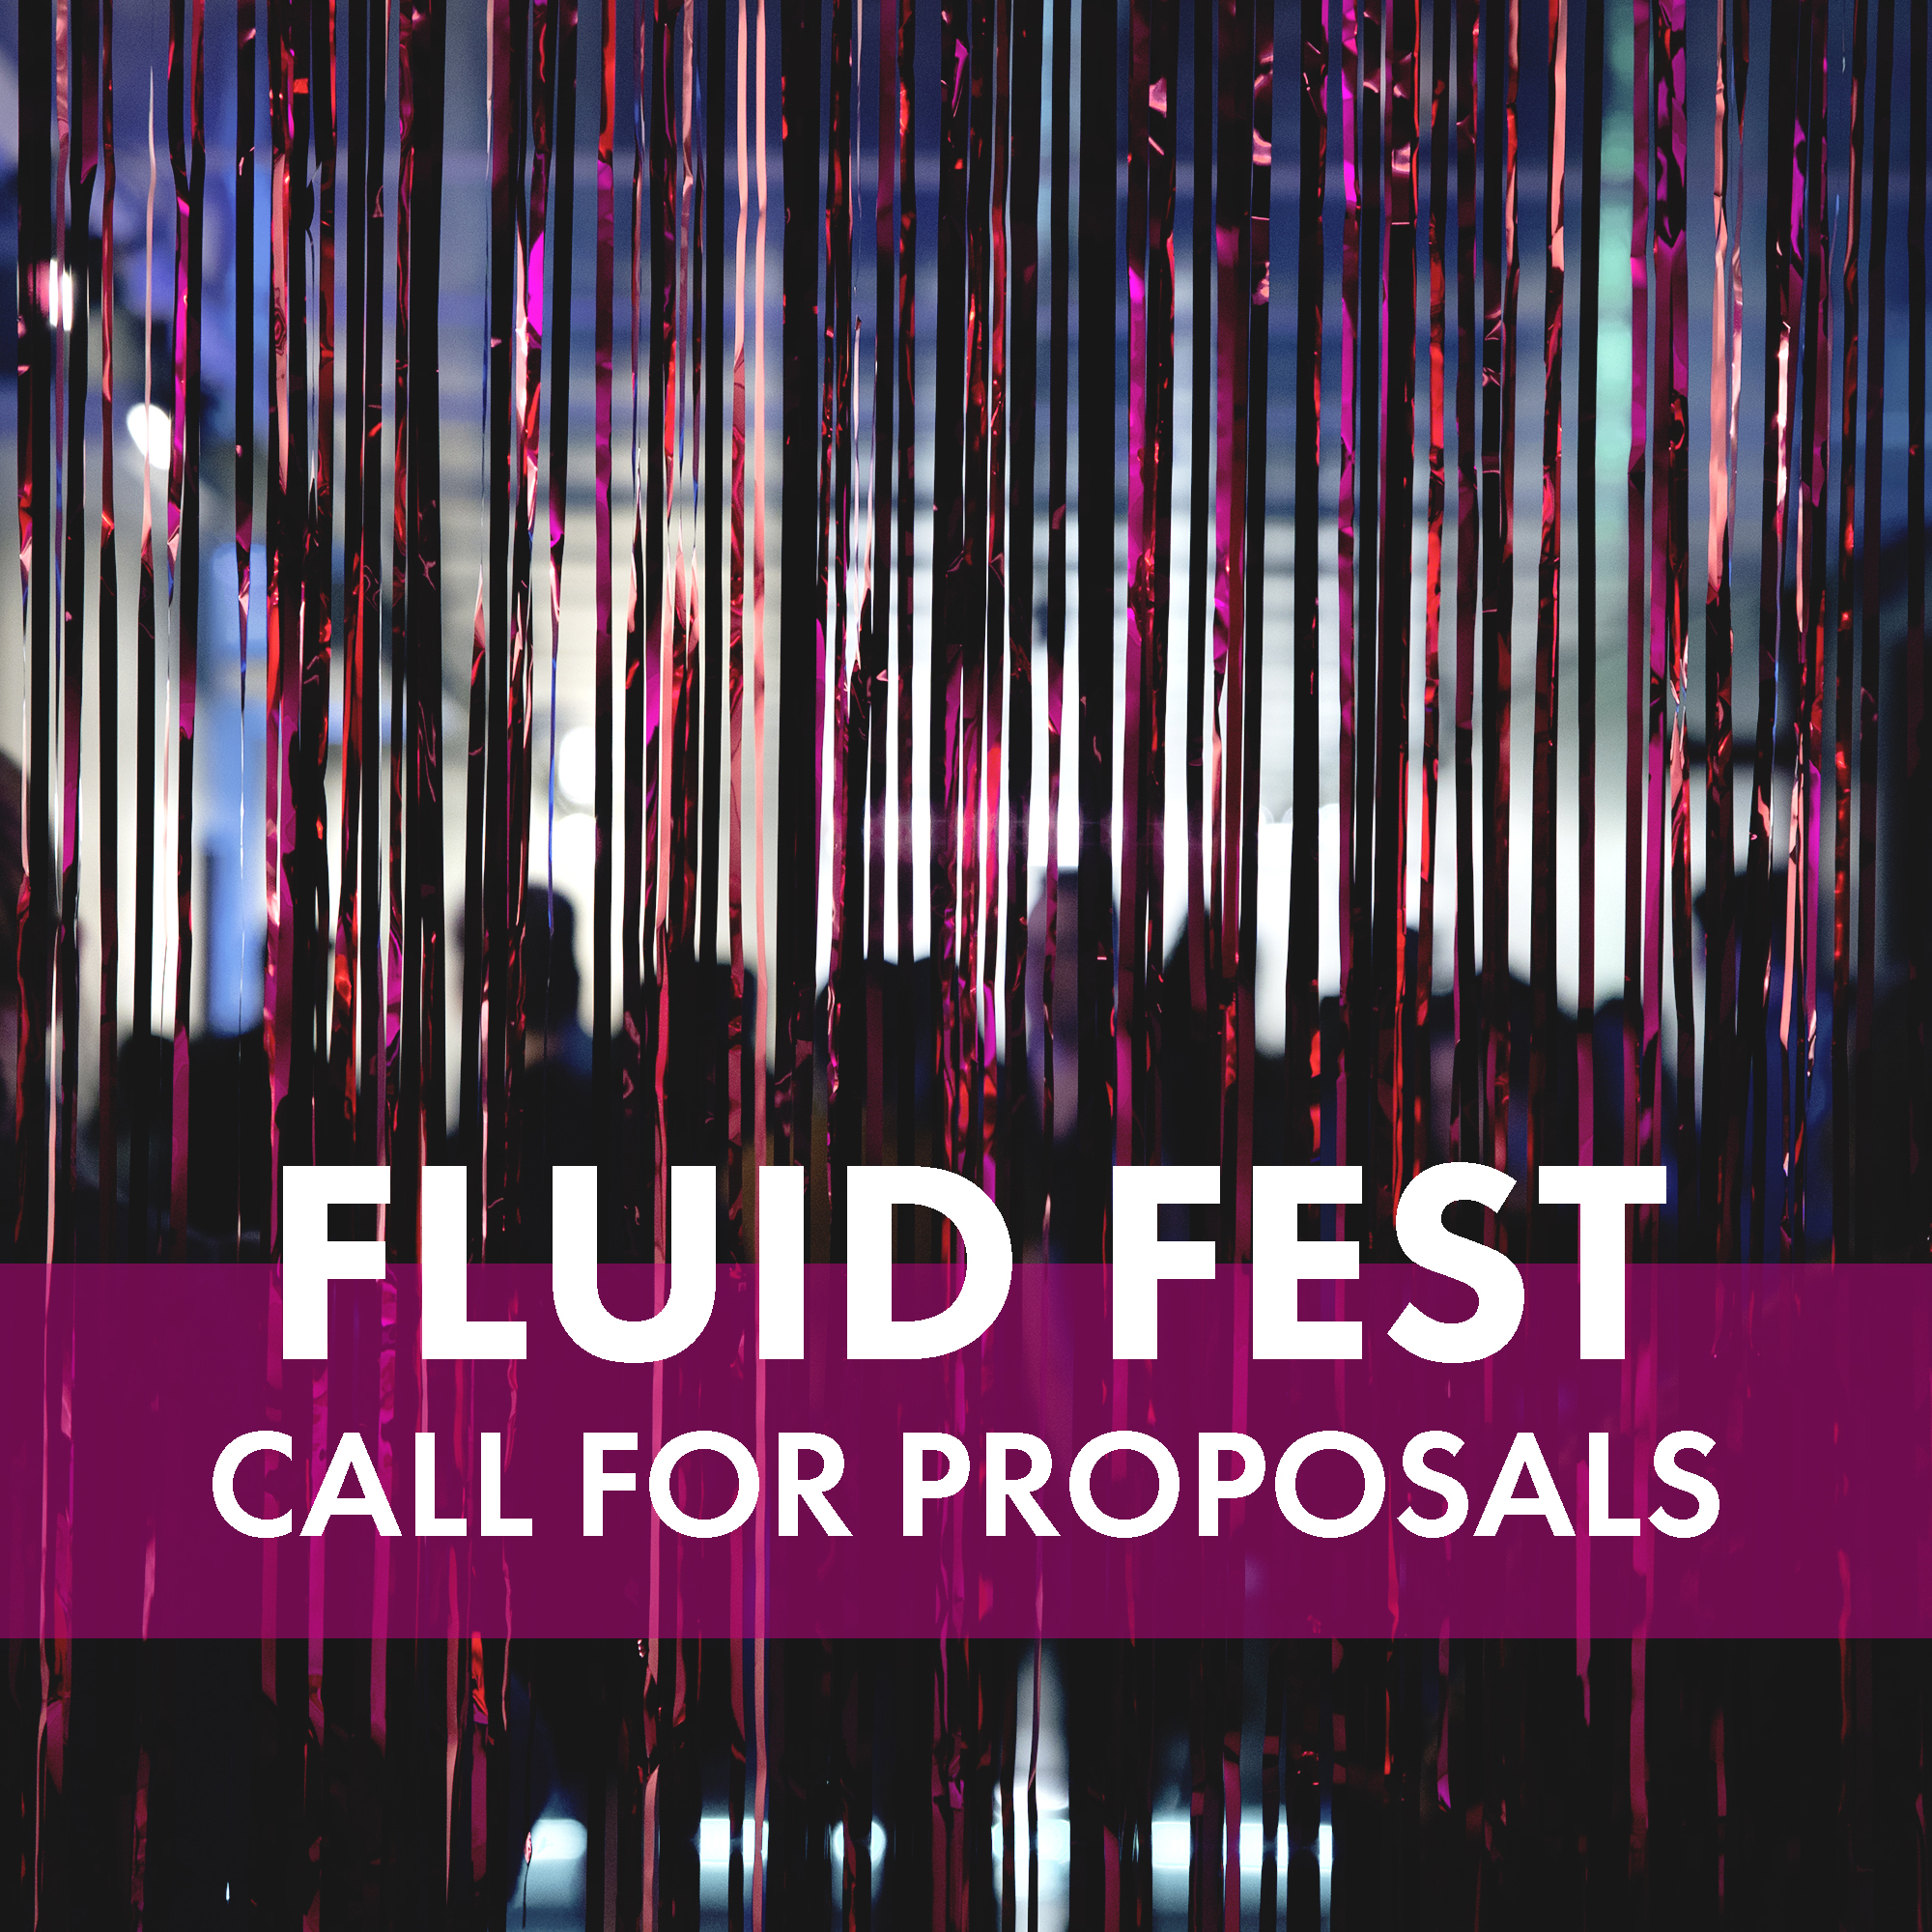 Image promo - Call for proposals - Fluid Fest 2019